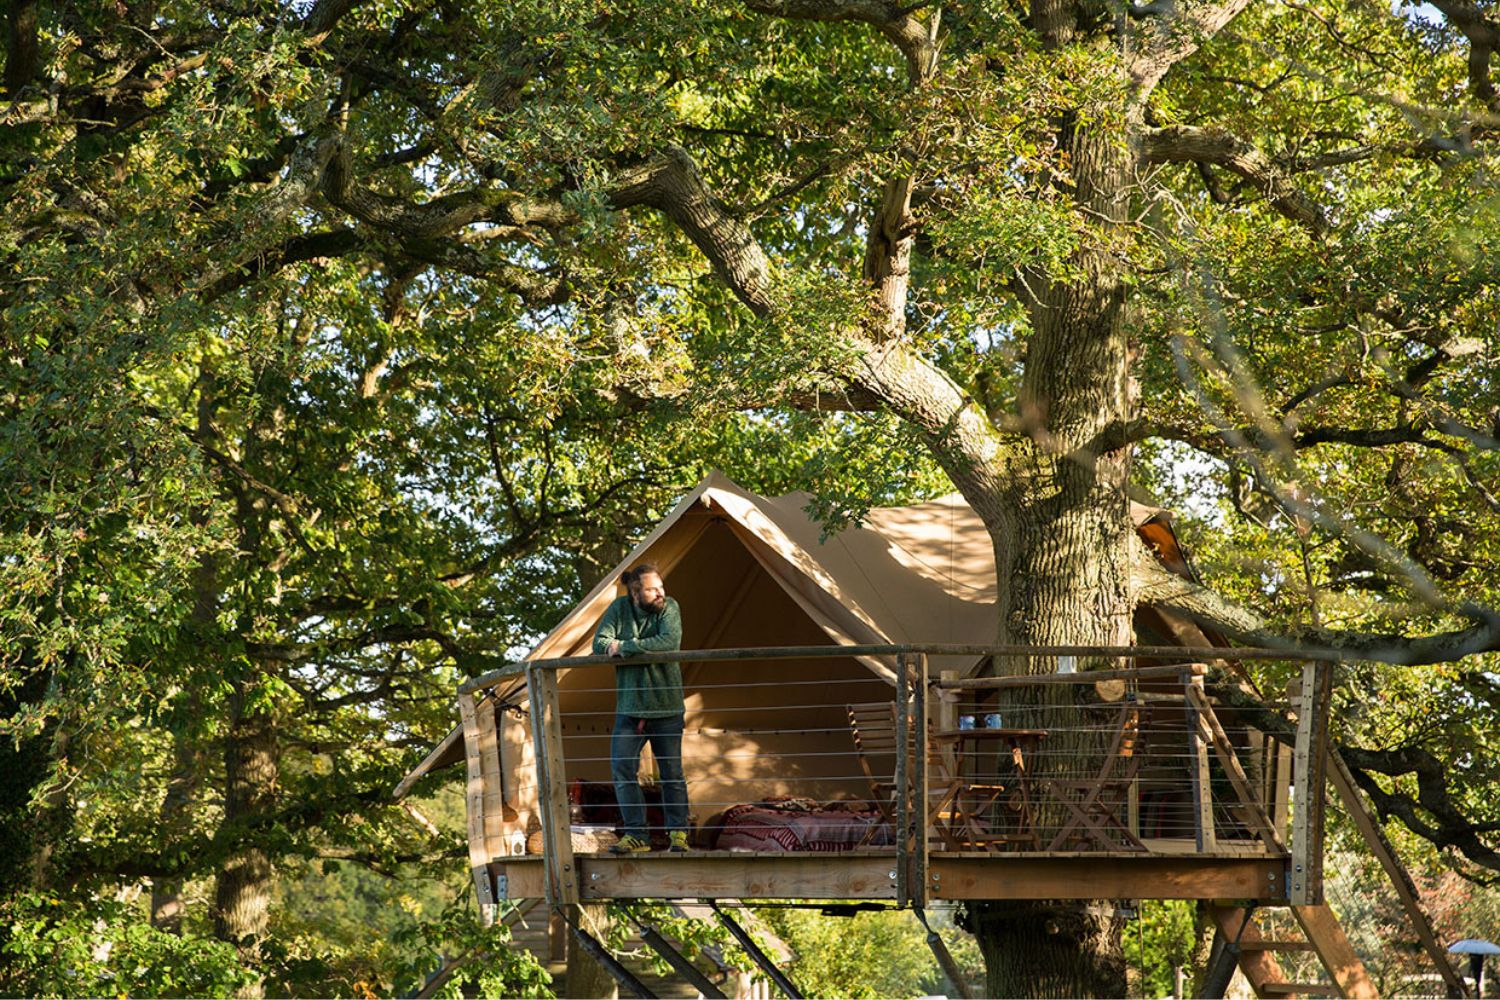 Man looking out from treehouse on sunny day - Tawny Owl Treehouse, Knepp Rewilding Project, Sussex, England